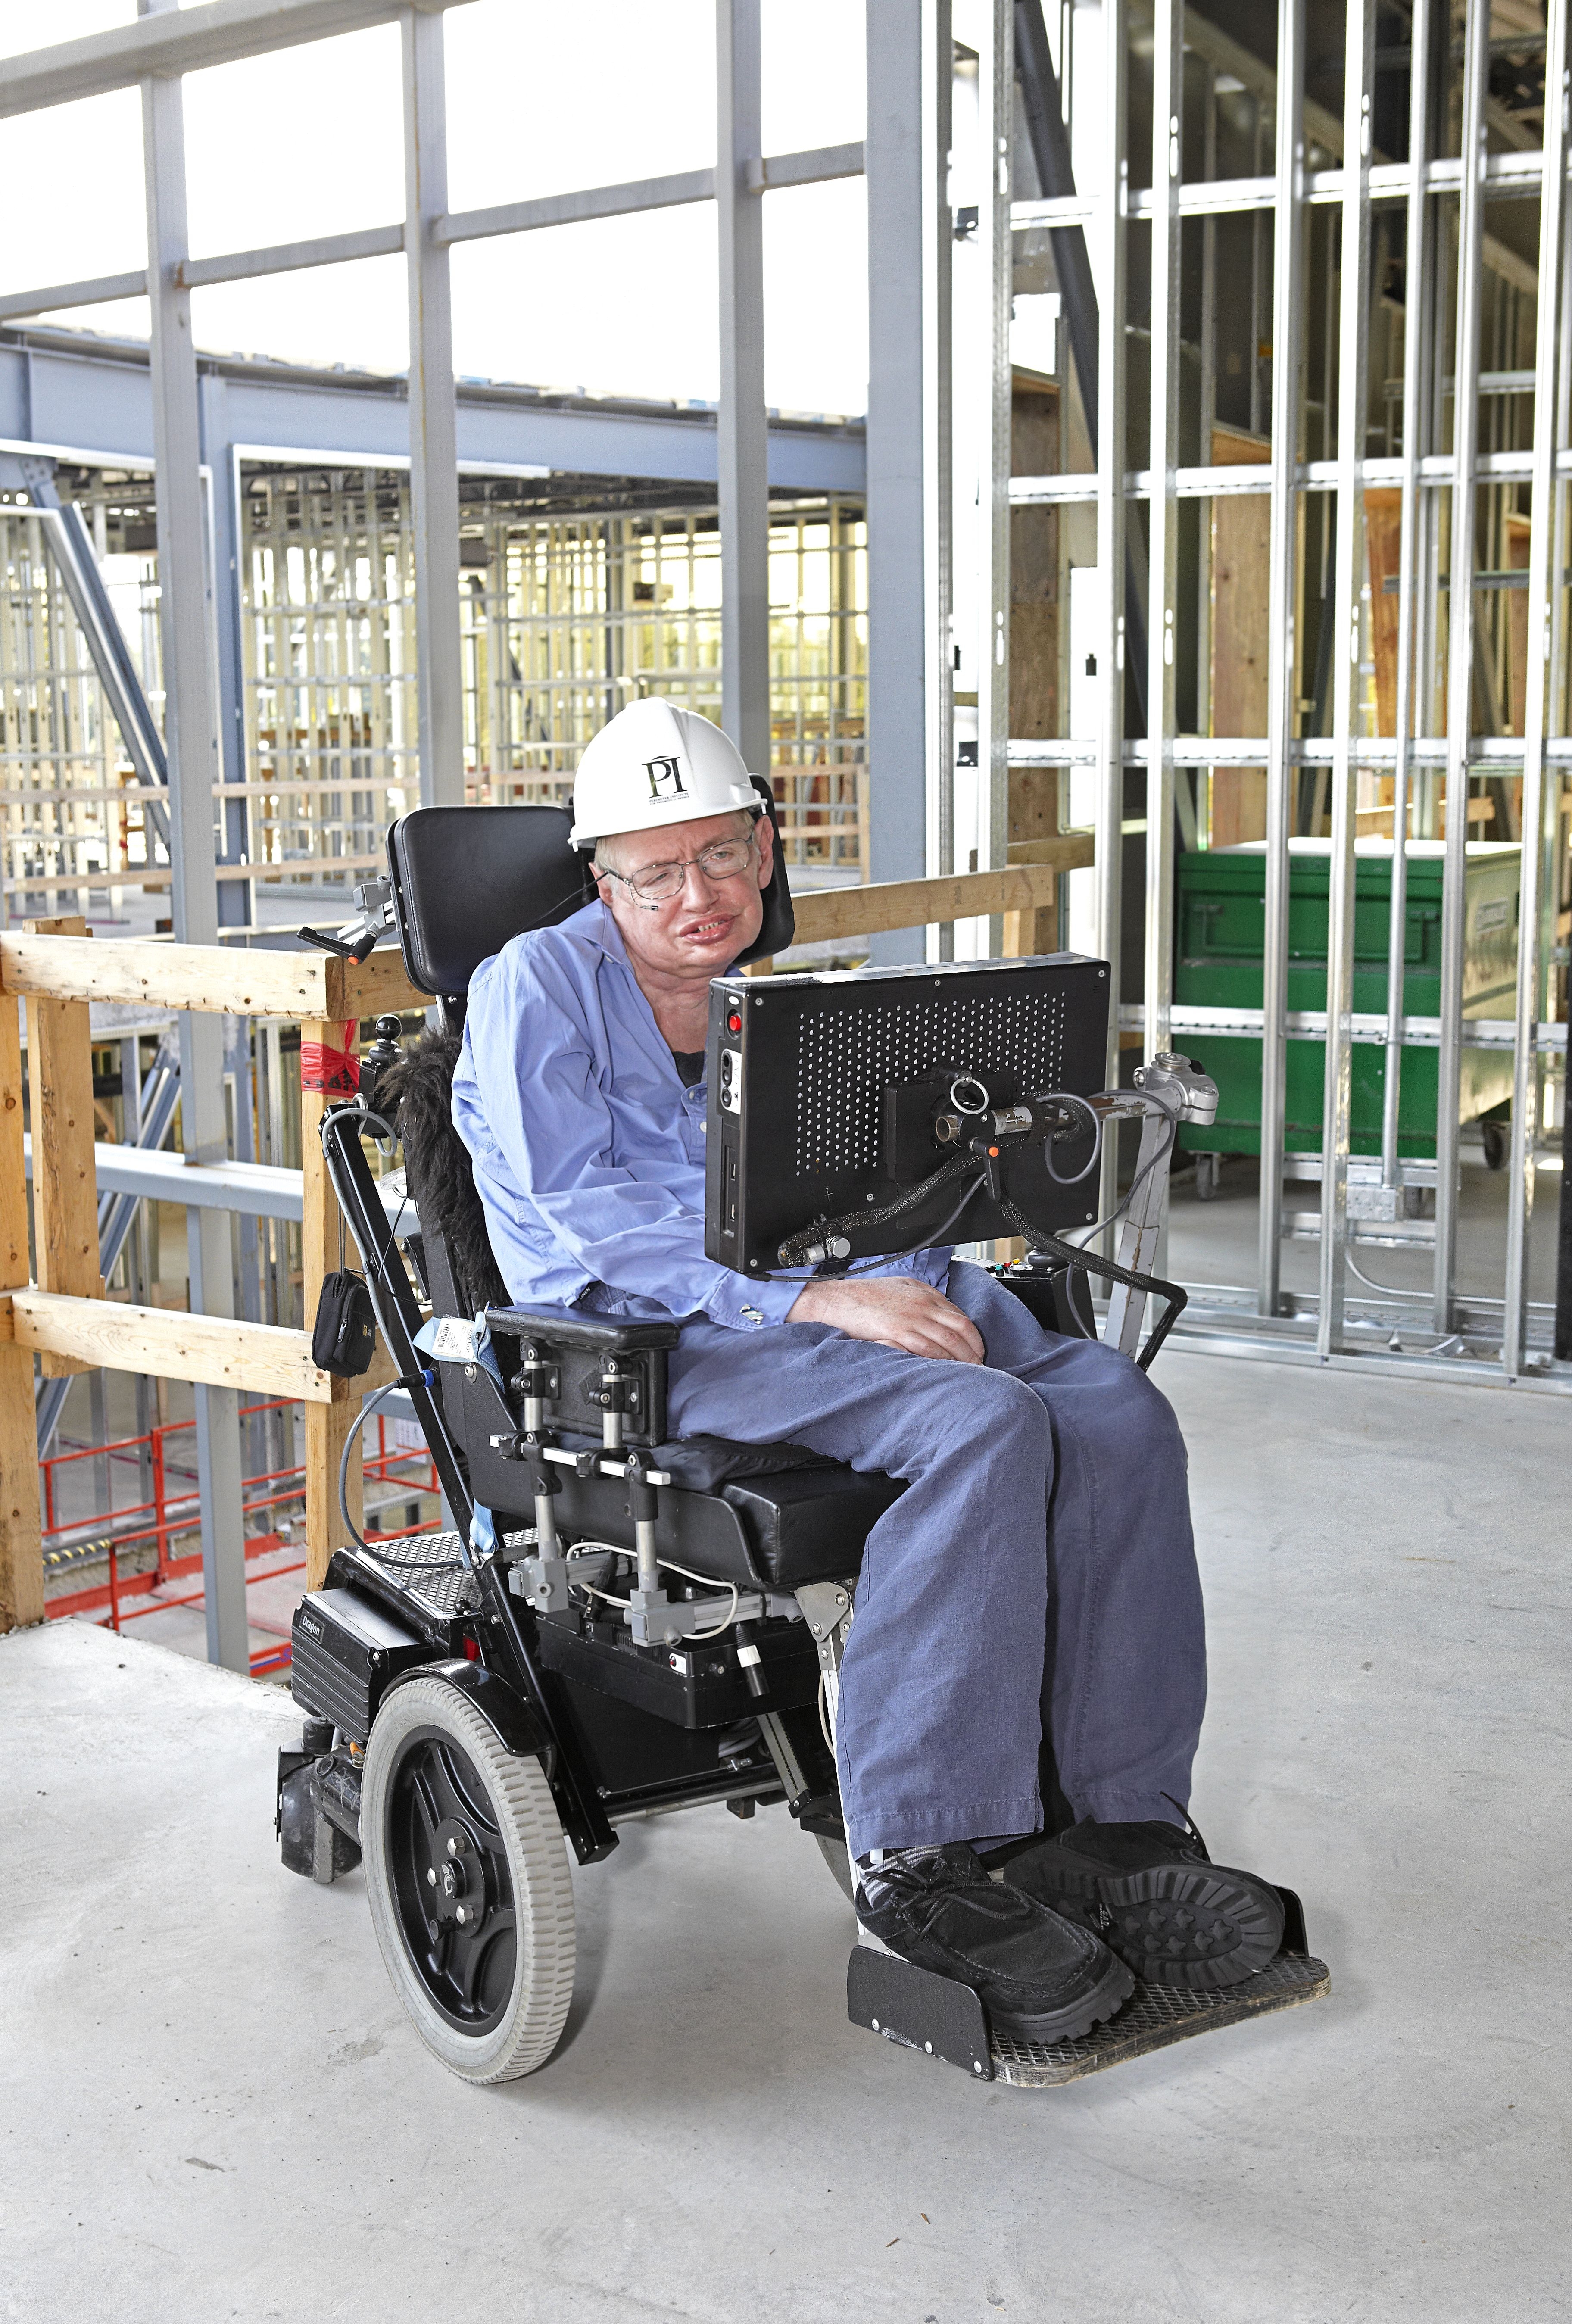 Stephen Hawking at the Stephen-Hawking-Center building site, with a hard hat